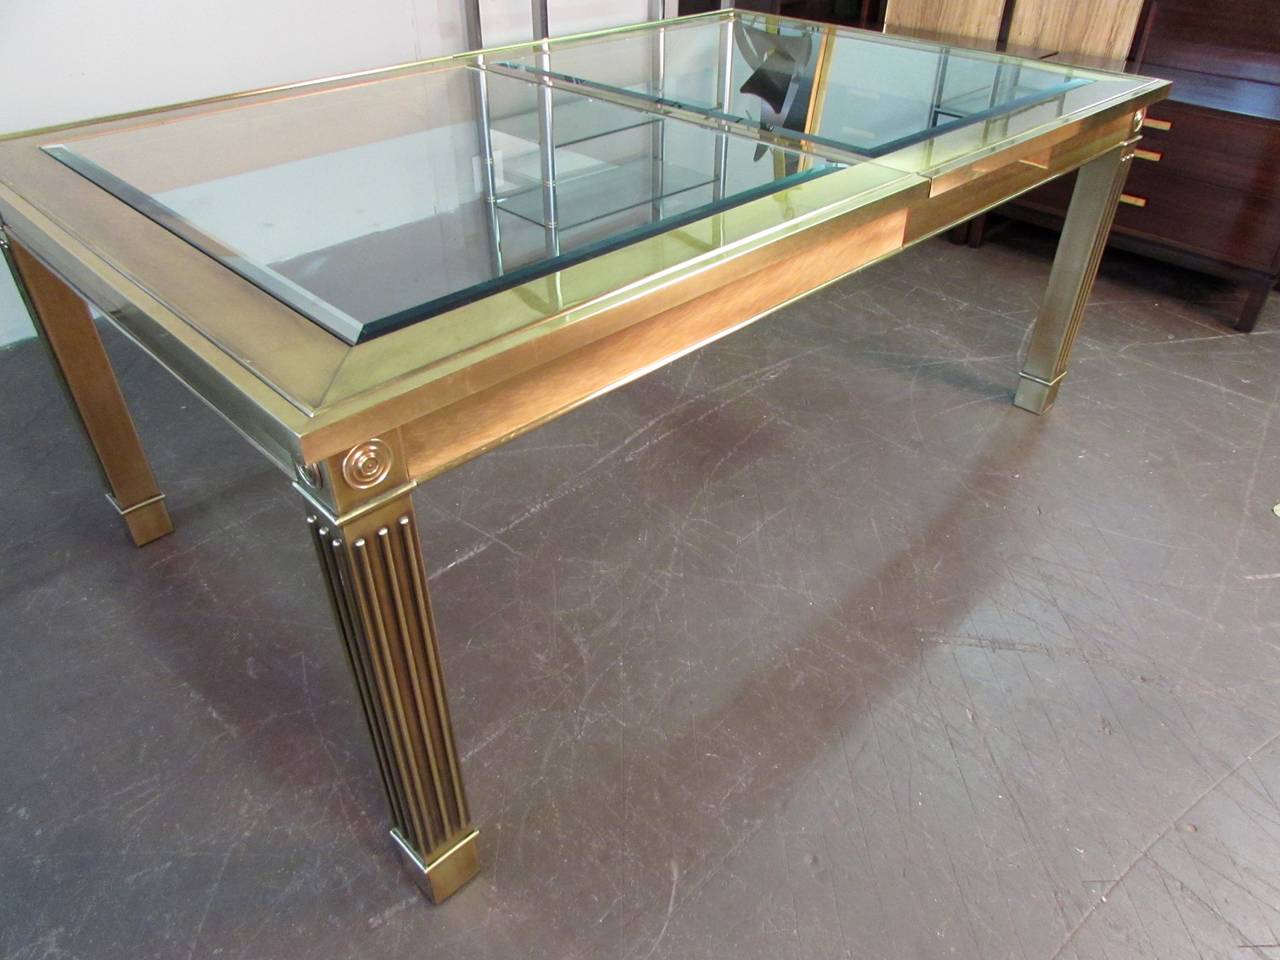 Hollywood Regency Striking Brass and Glass Dining Table with Leaf by Mastercraft, 1970s